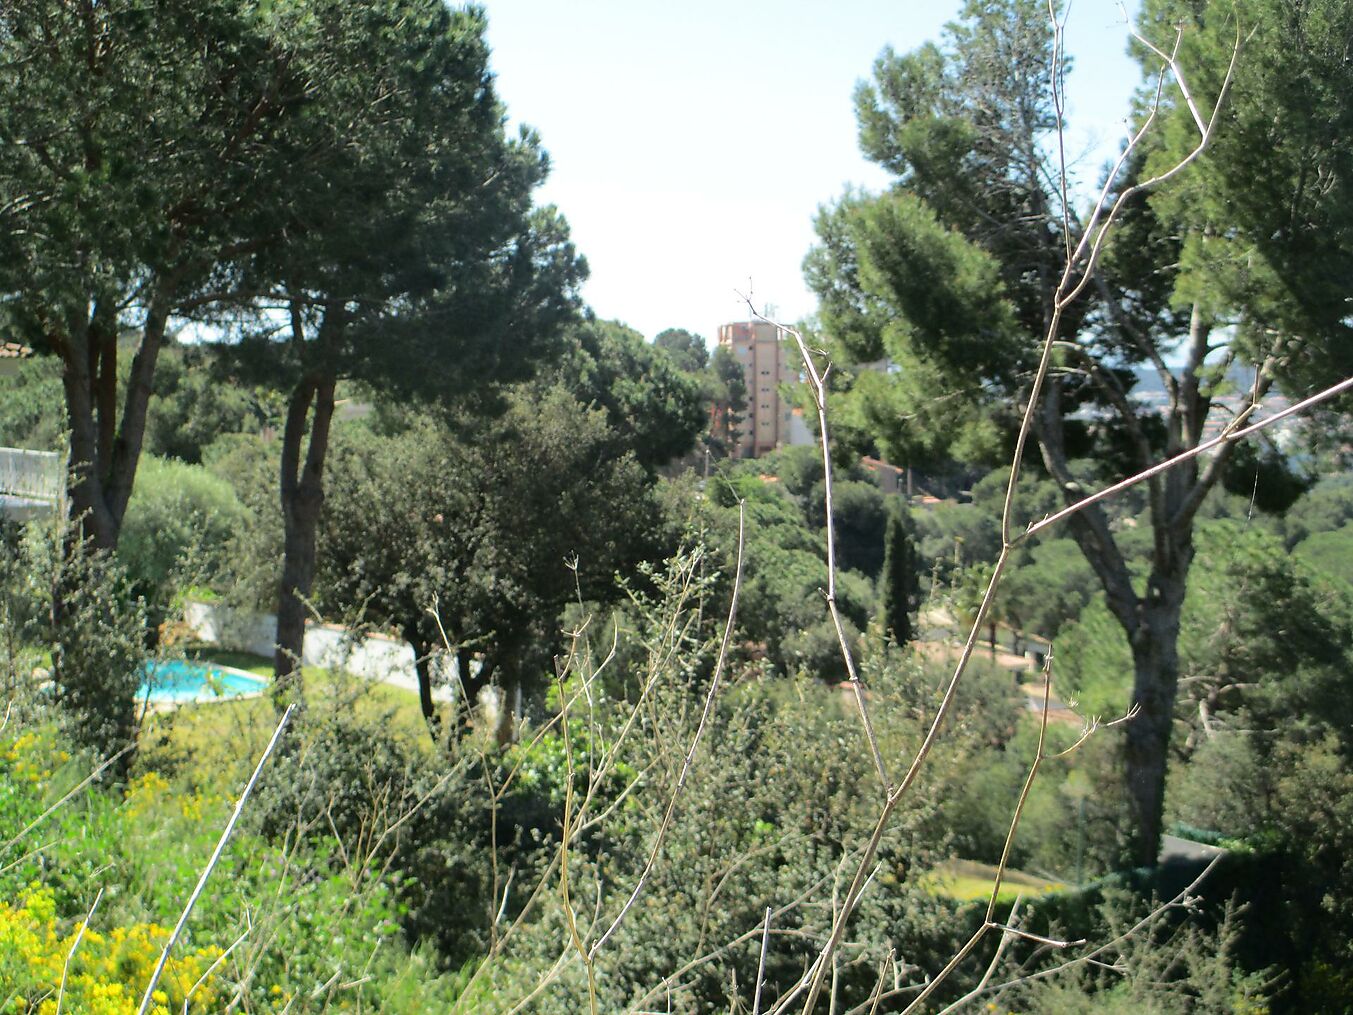 Plot of land in the centre of Playa de Aro area with sea views.